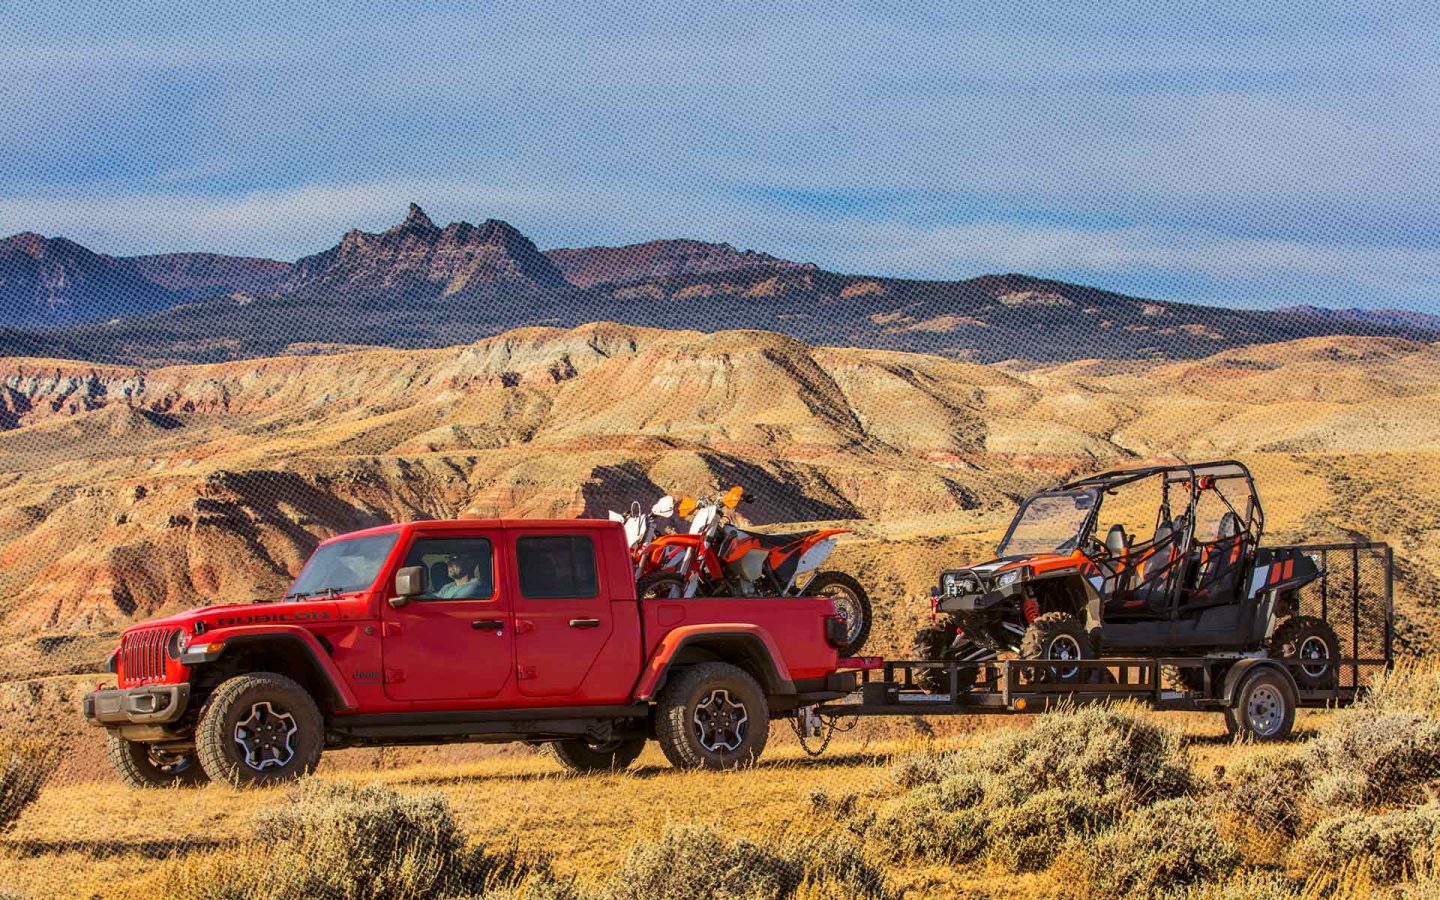 Red Gladiator with dirt bikes in truck bed towing an offroad vehicle